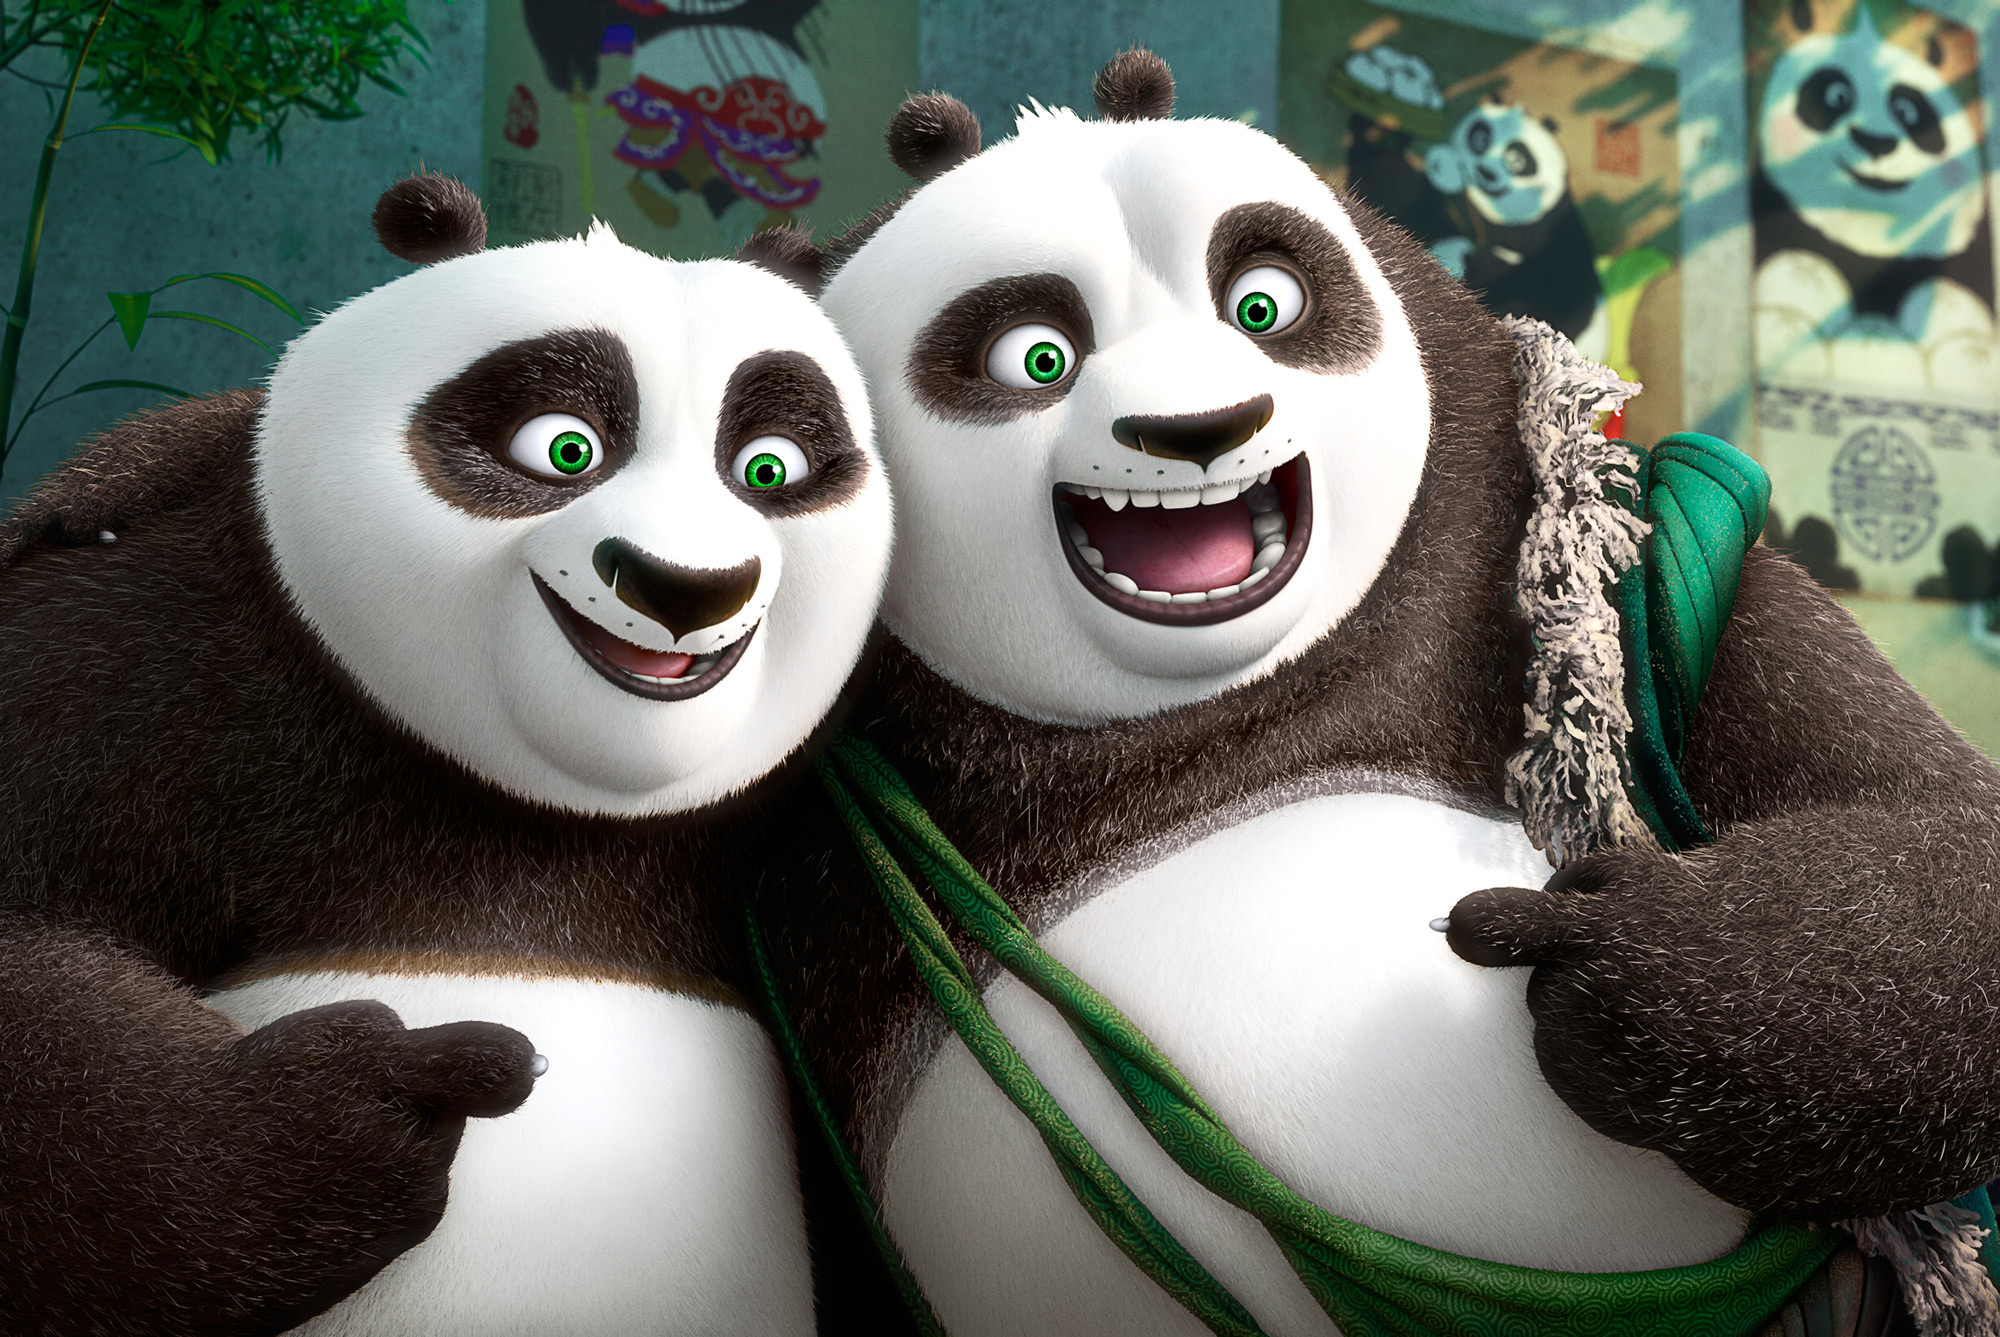 KUNG FU PANDA 3 Awesome Edition on Bluray and DVD June 28